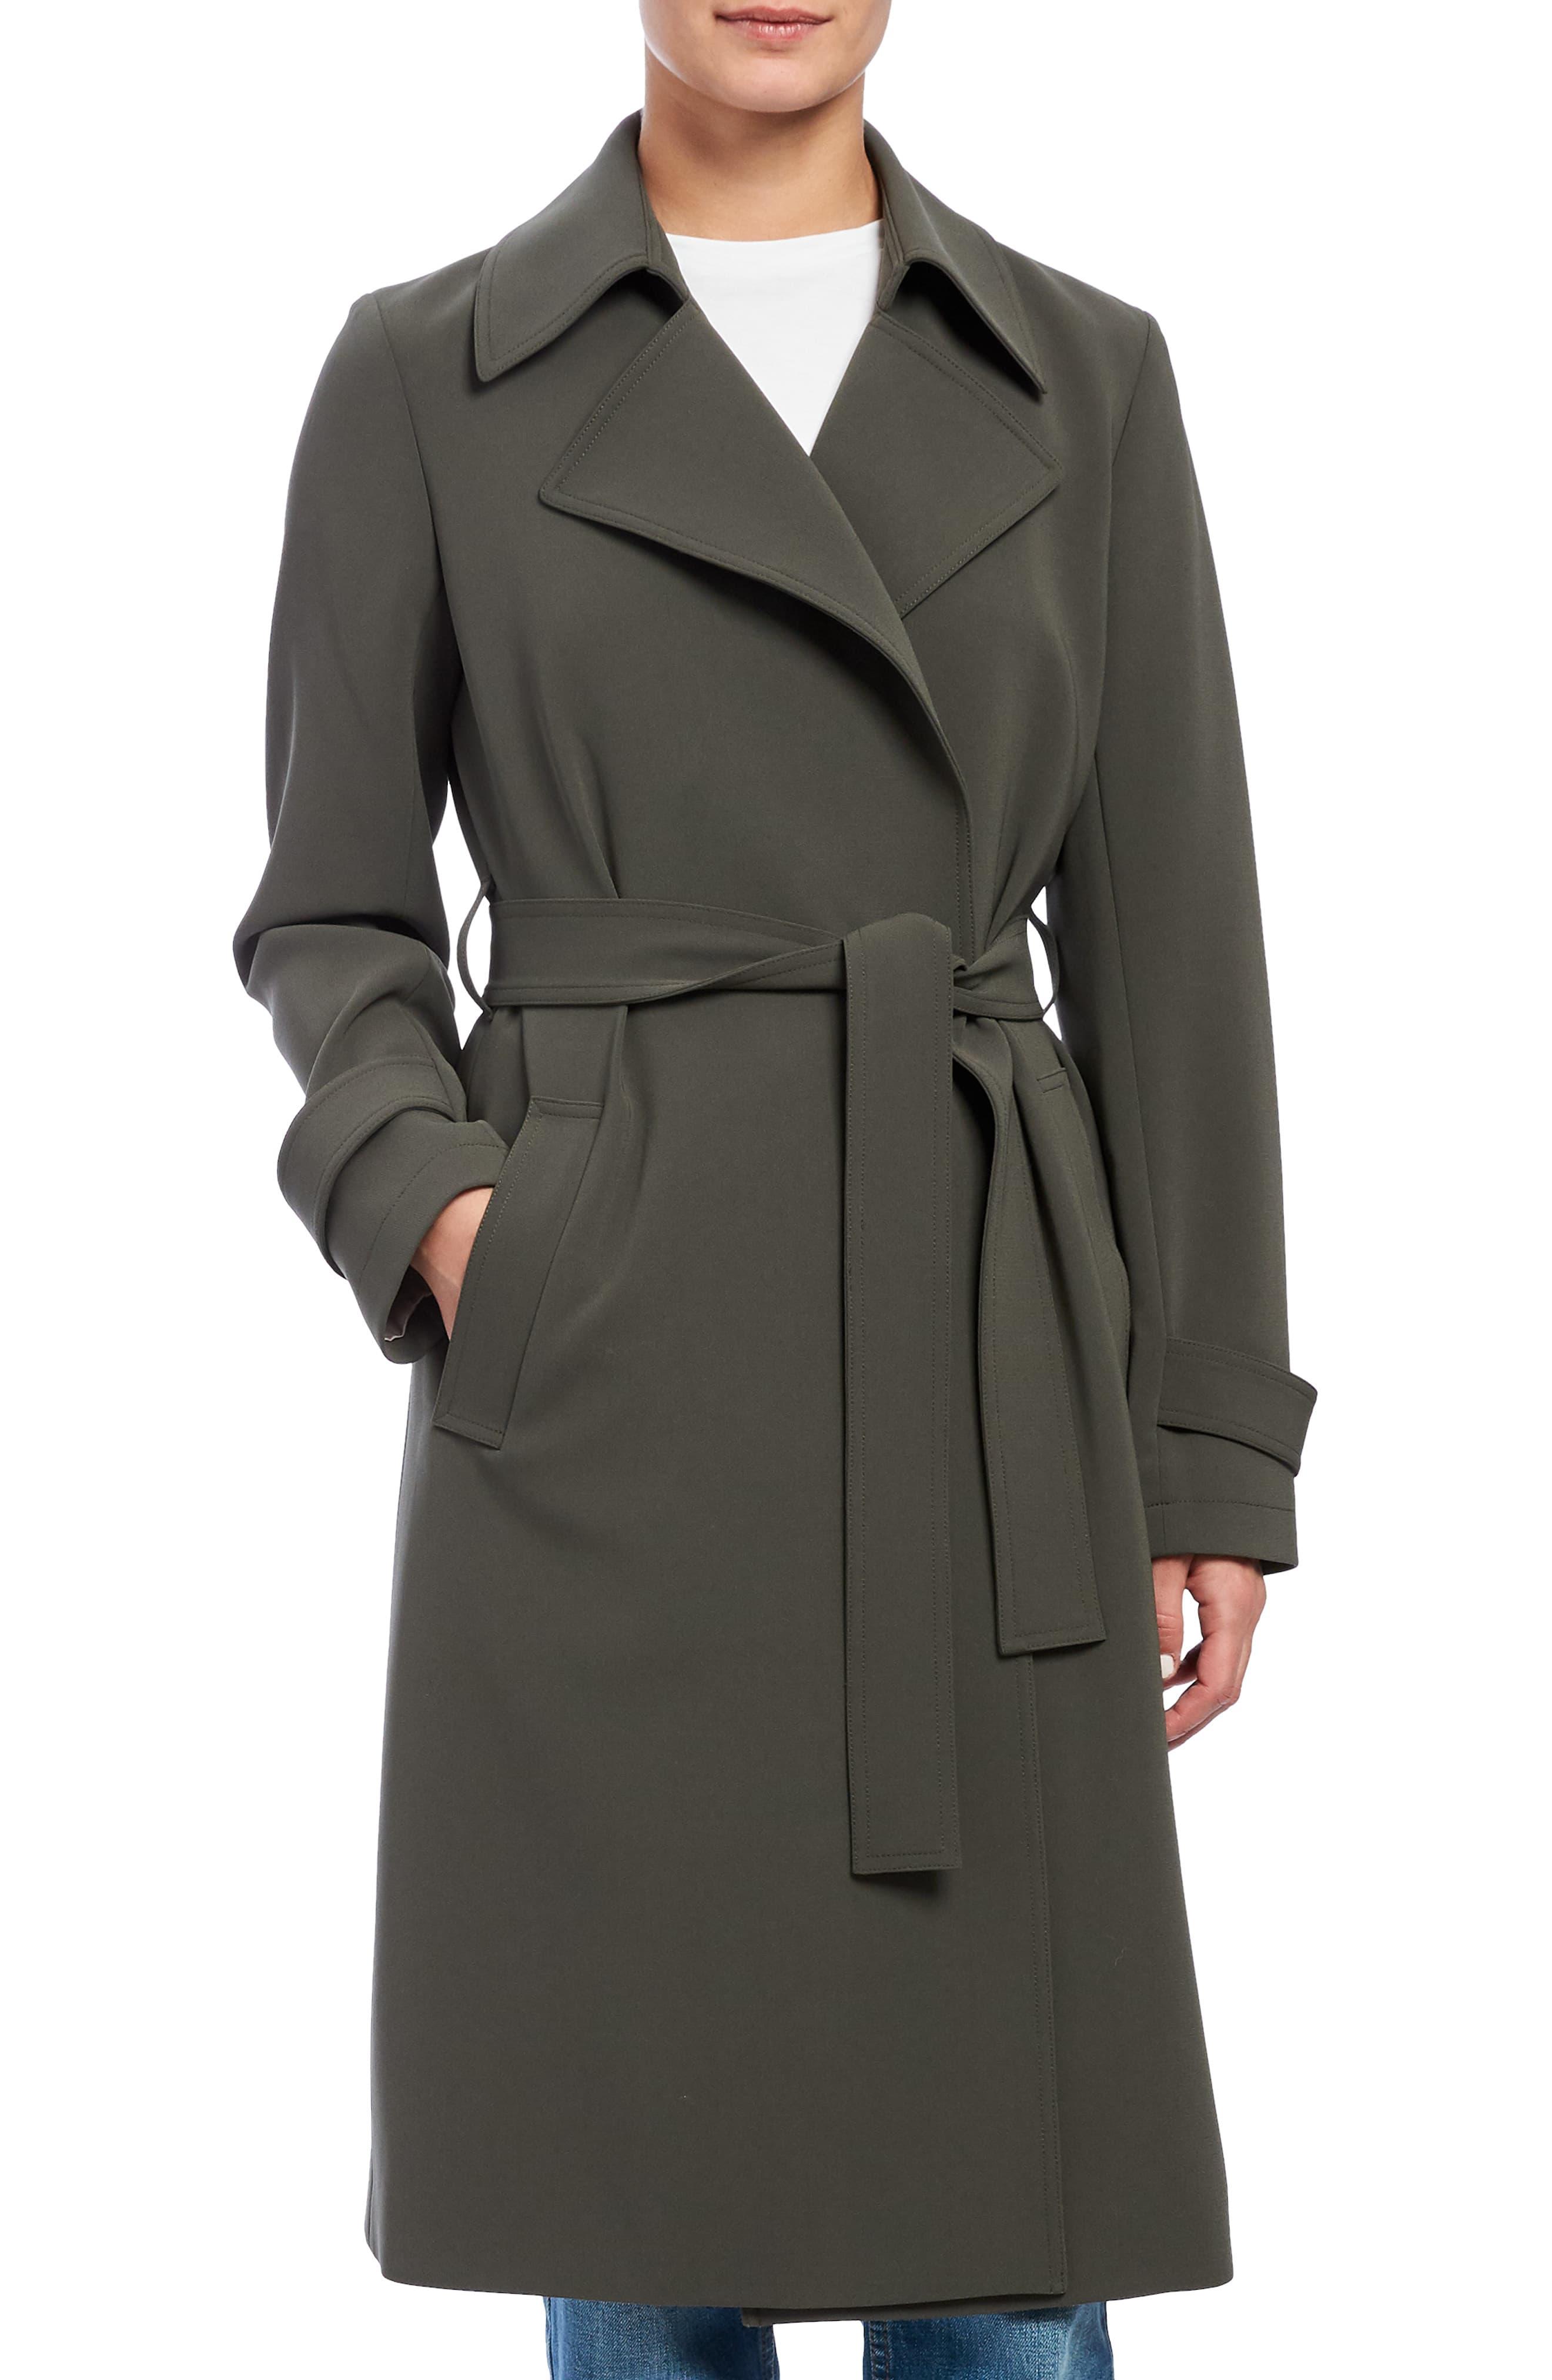 Theory Oaklane Admiral Crepe Trench Coat in Green Slate (Green) - Lyst